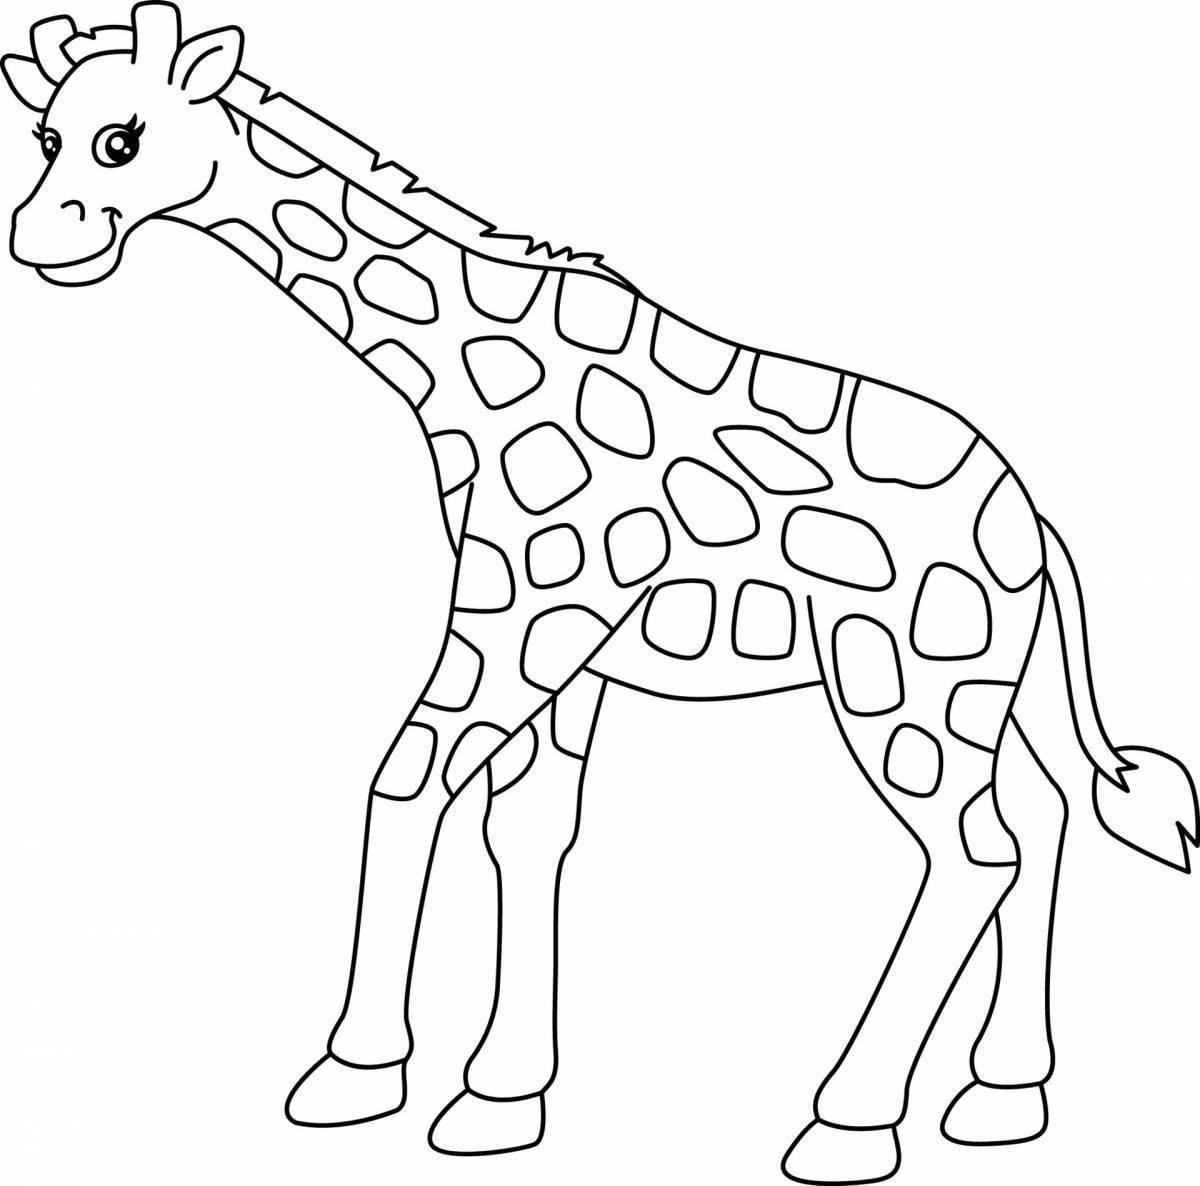 Exquisite giraffe coloring book for 3-4 year olds